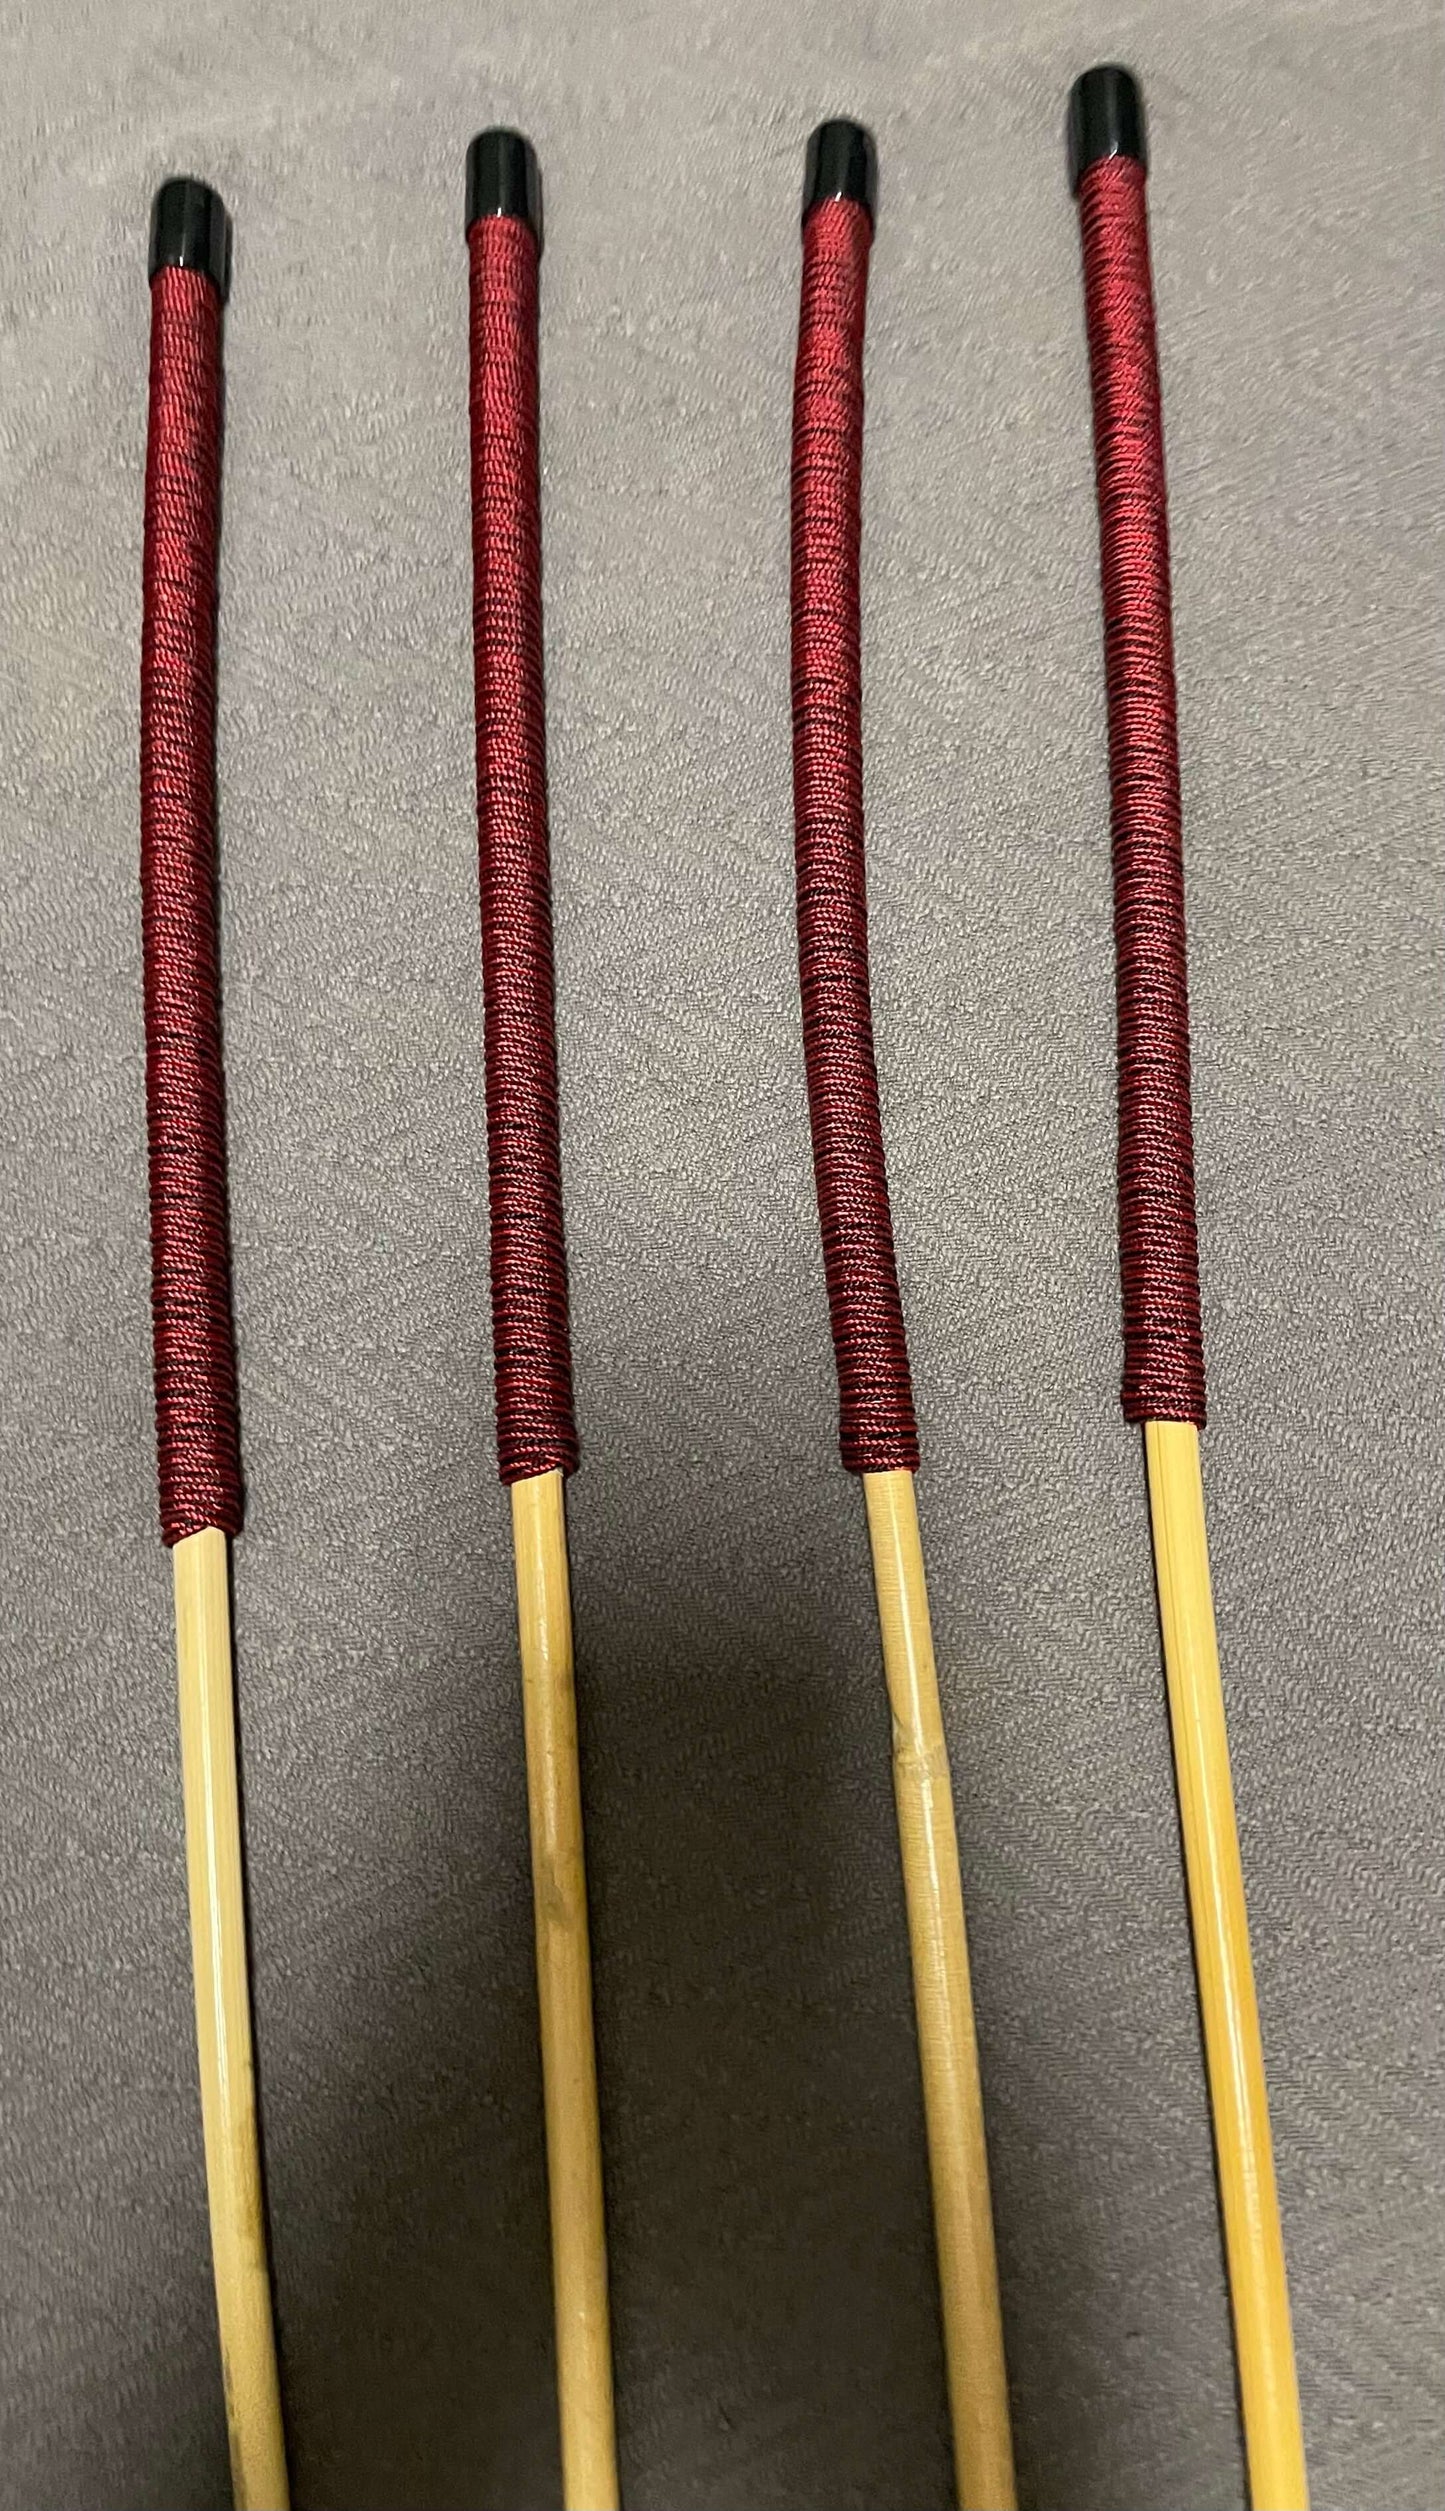 Set of 4 Classic Kooboo Rattan Punishment canes  with Liquorice Paracord Handles - 85 to 88 cms Length - 9.5 to 10.5 mm Diameters - Englishvice Canes